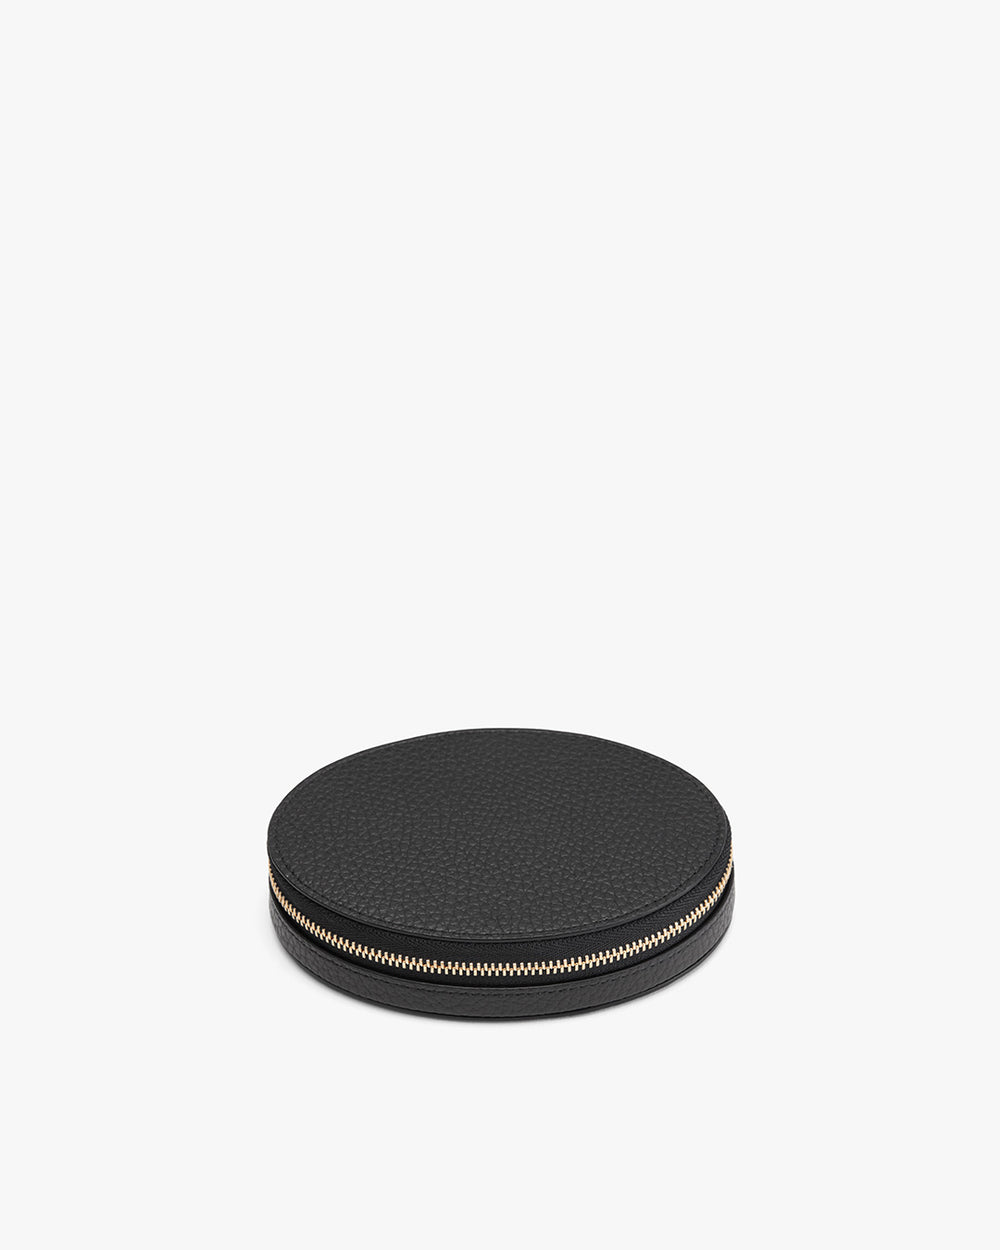 Round object with a zipper on a plain background.